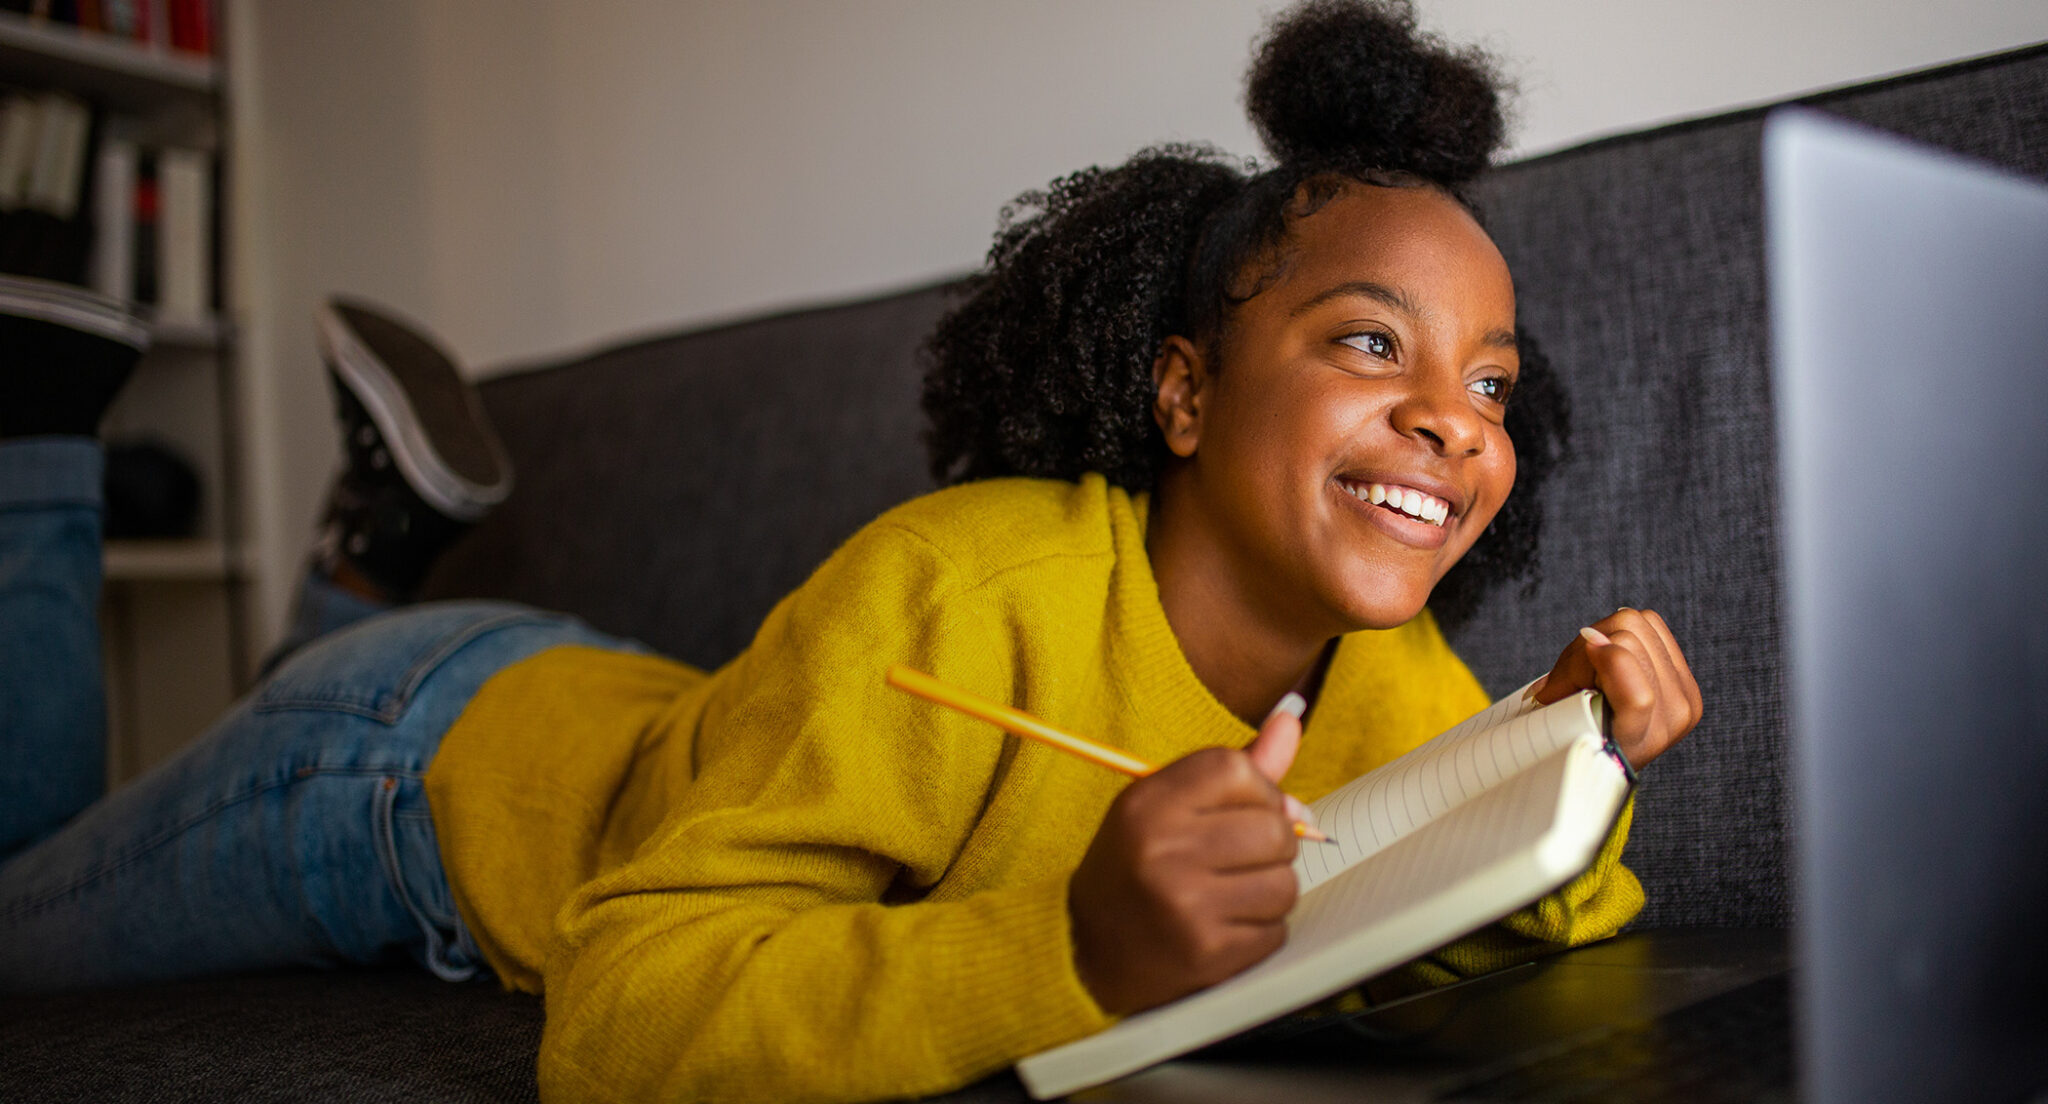 African American teenage girl doing her homework on a couch, smiling.